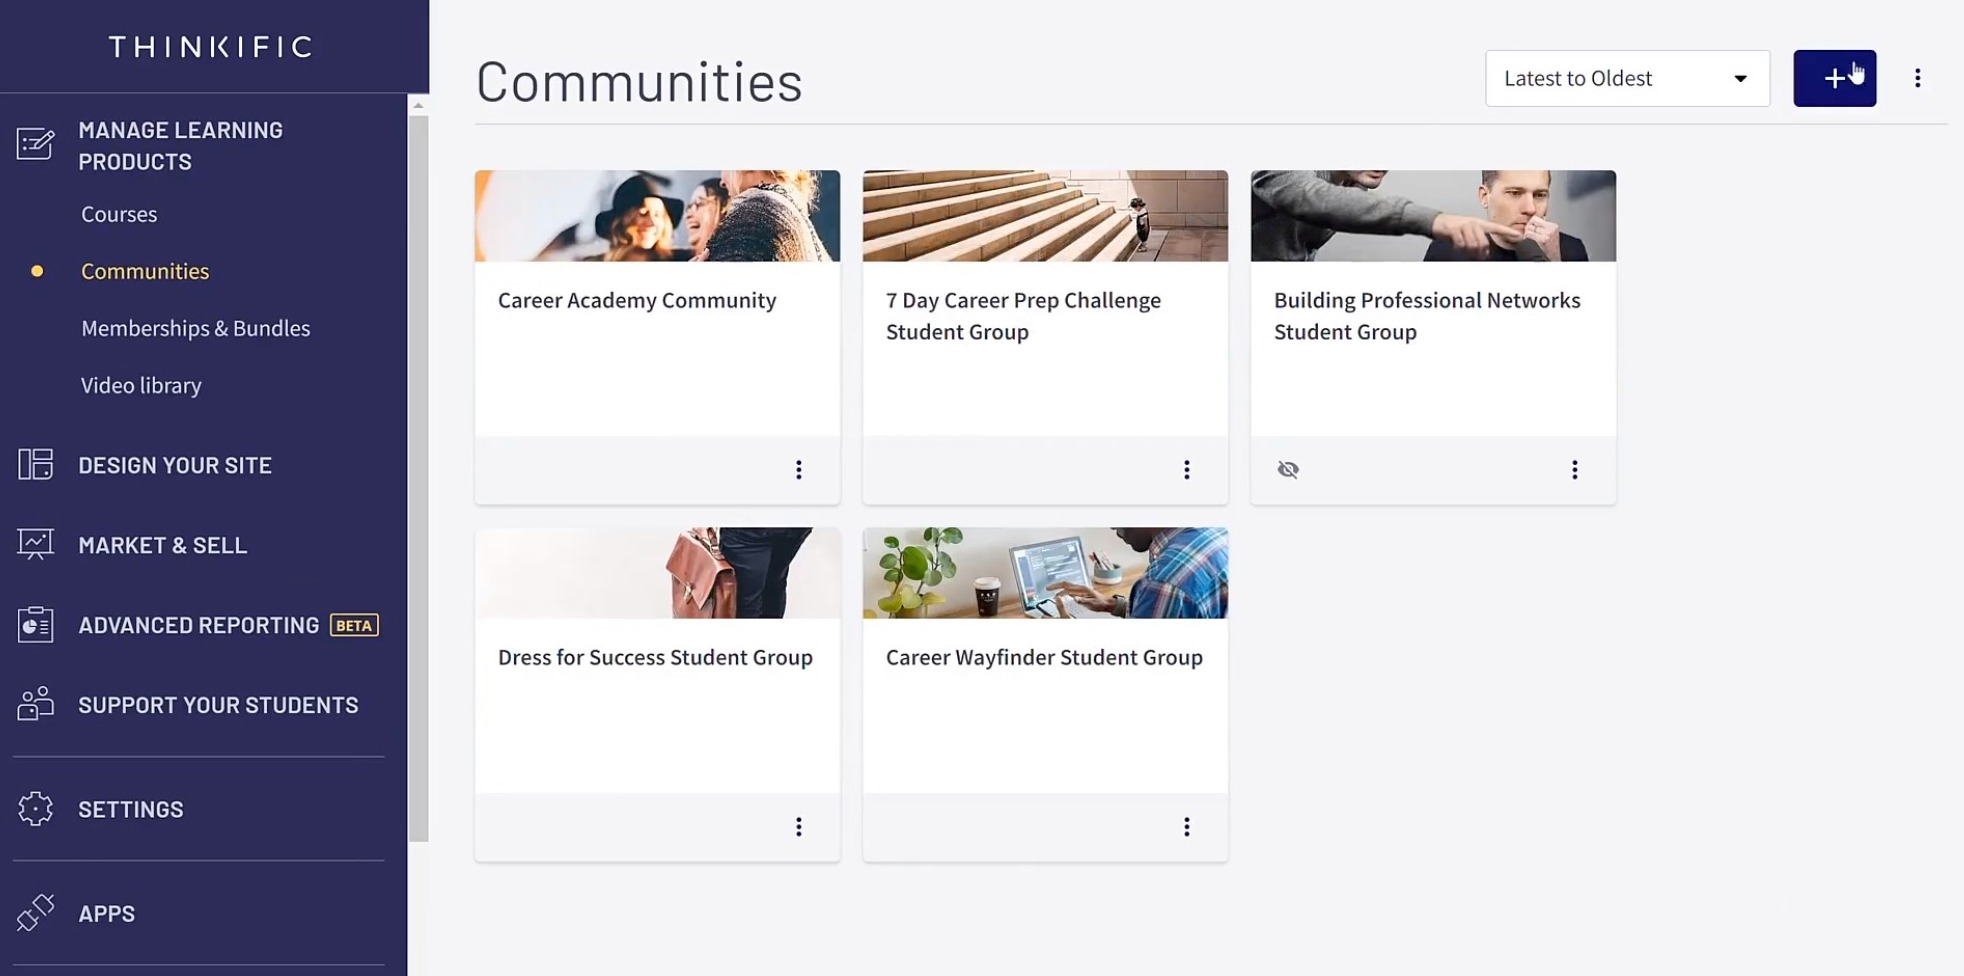 Thinkific communities page